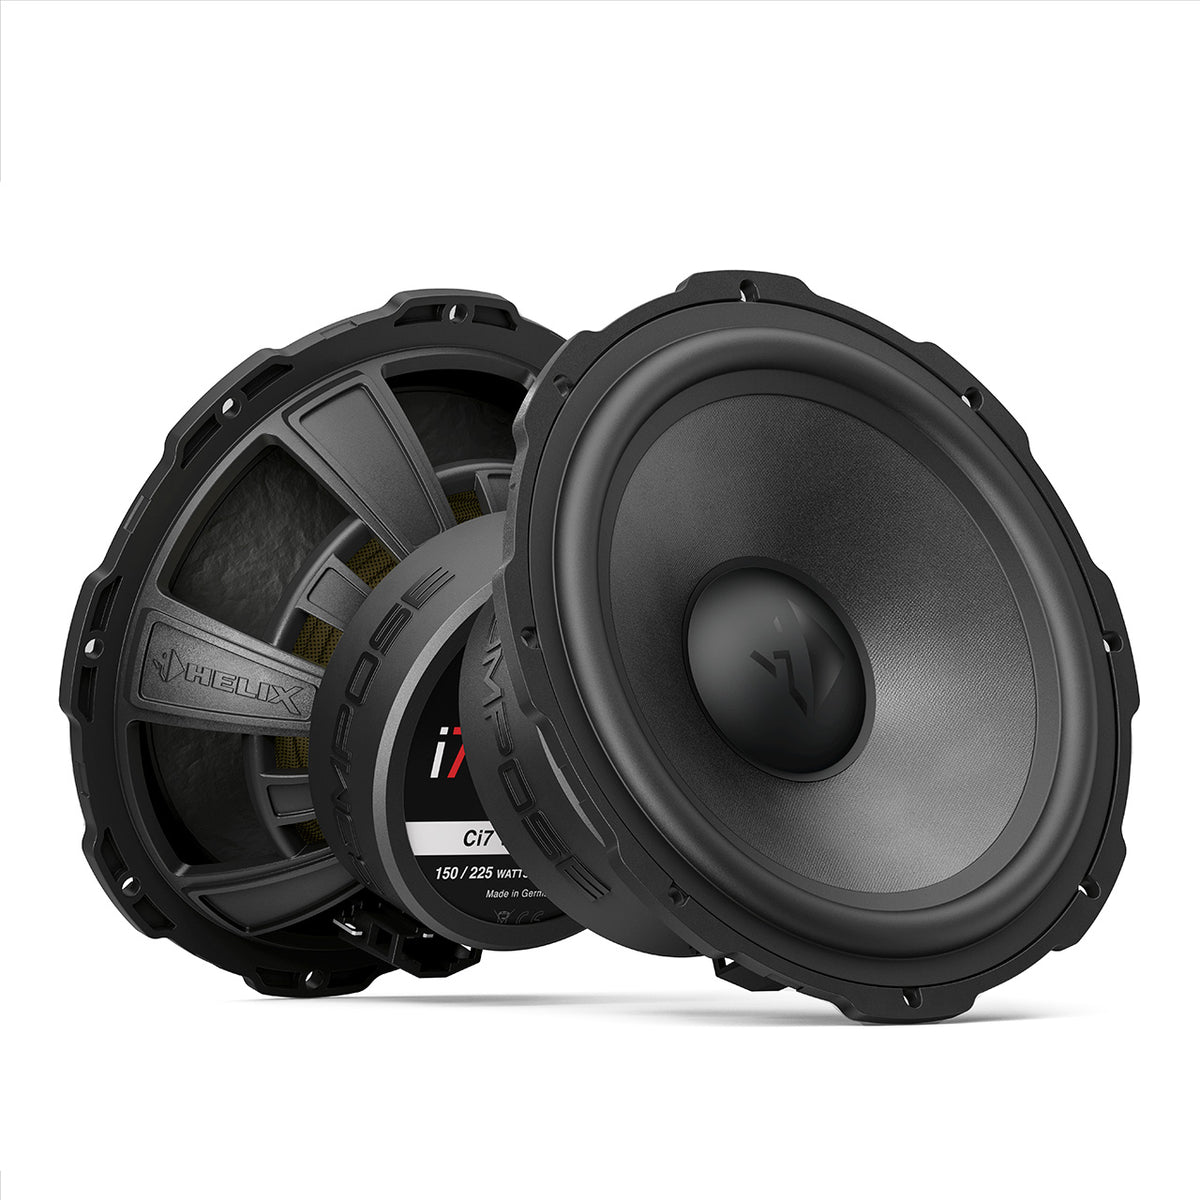 Helix Compose Ci7 W165FM-S3 6.5 Inch Midbass Speakers